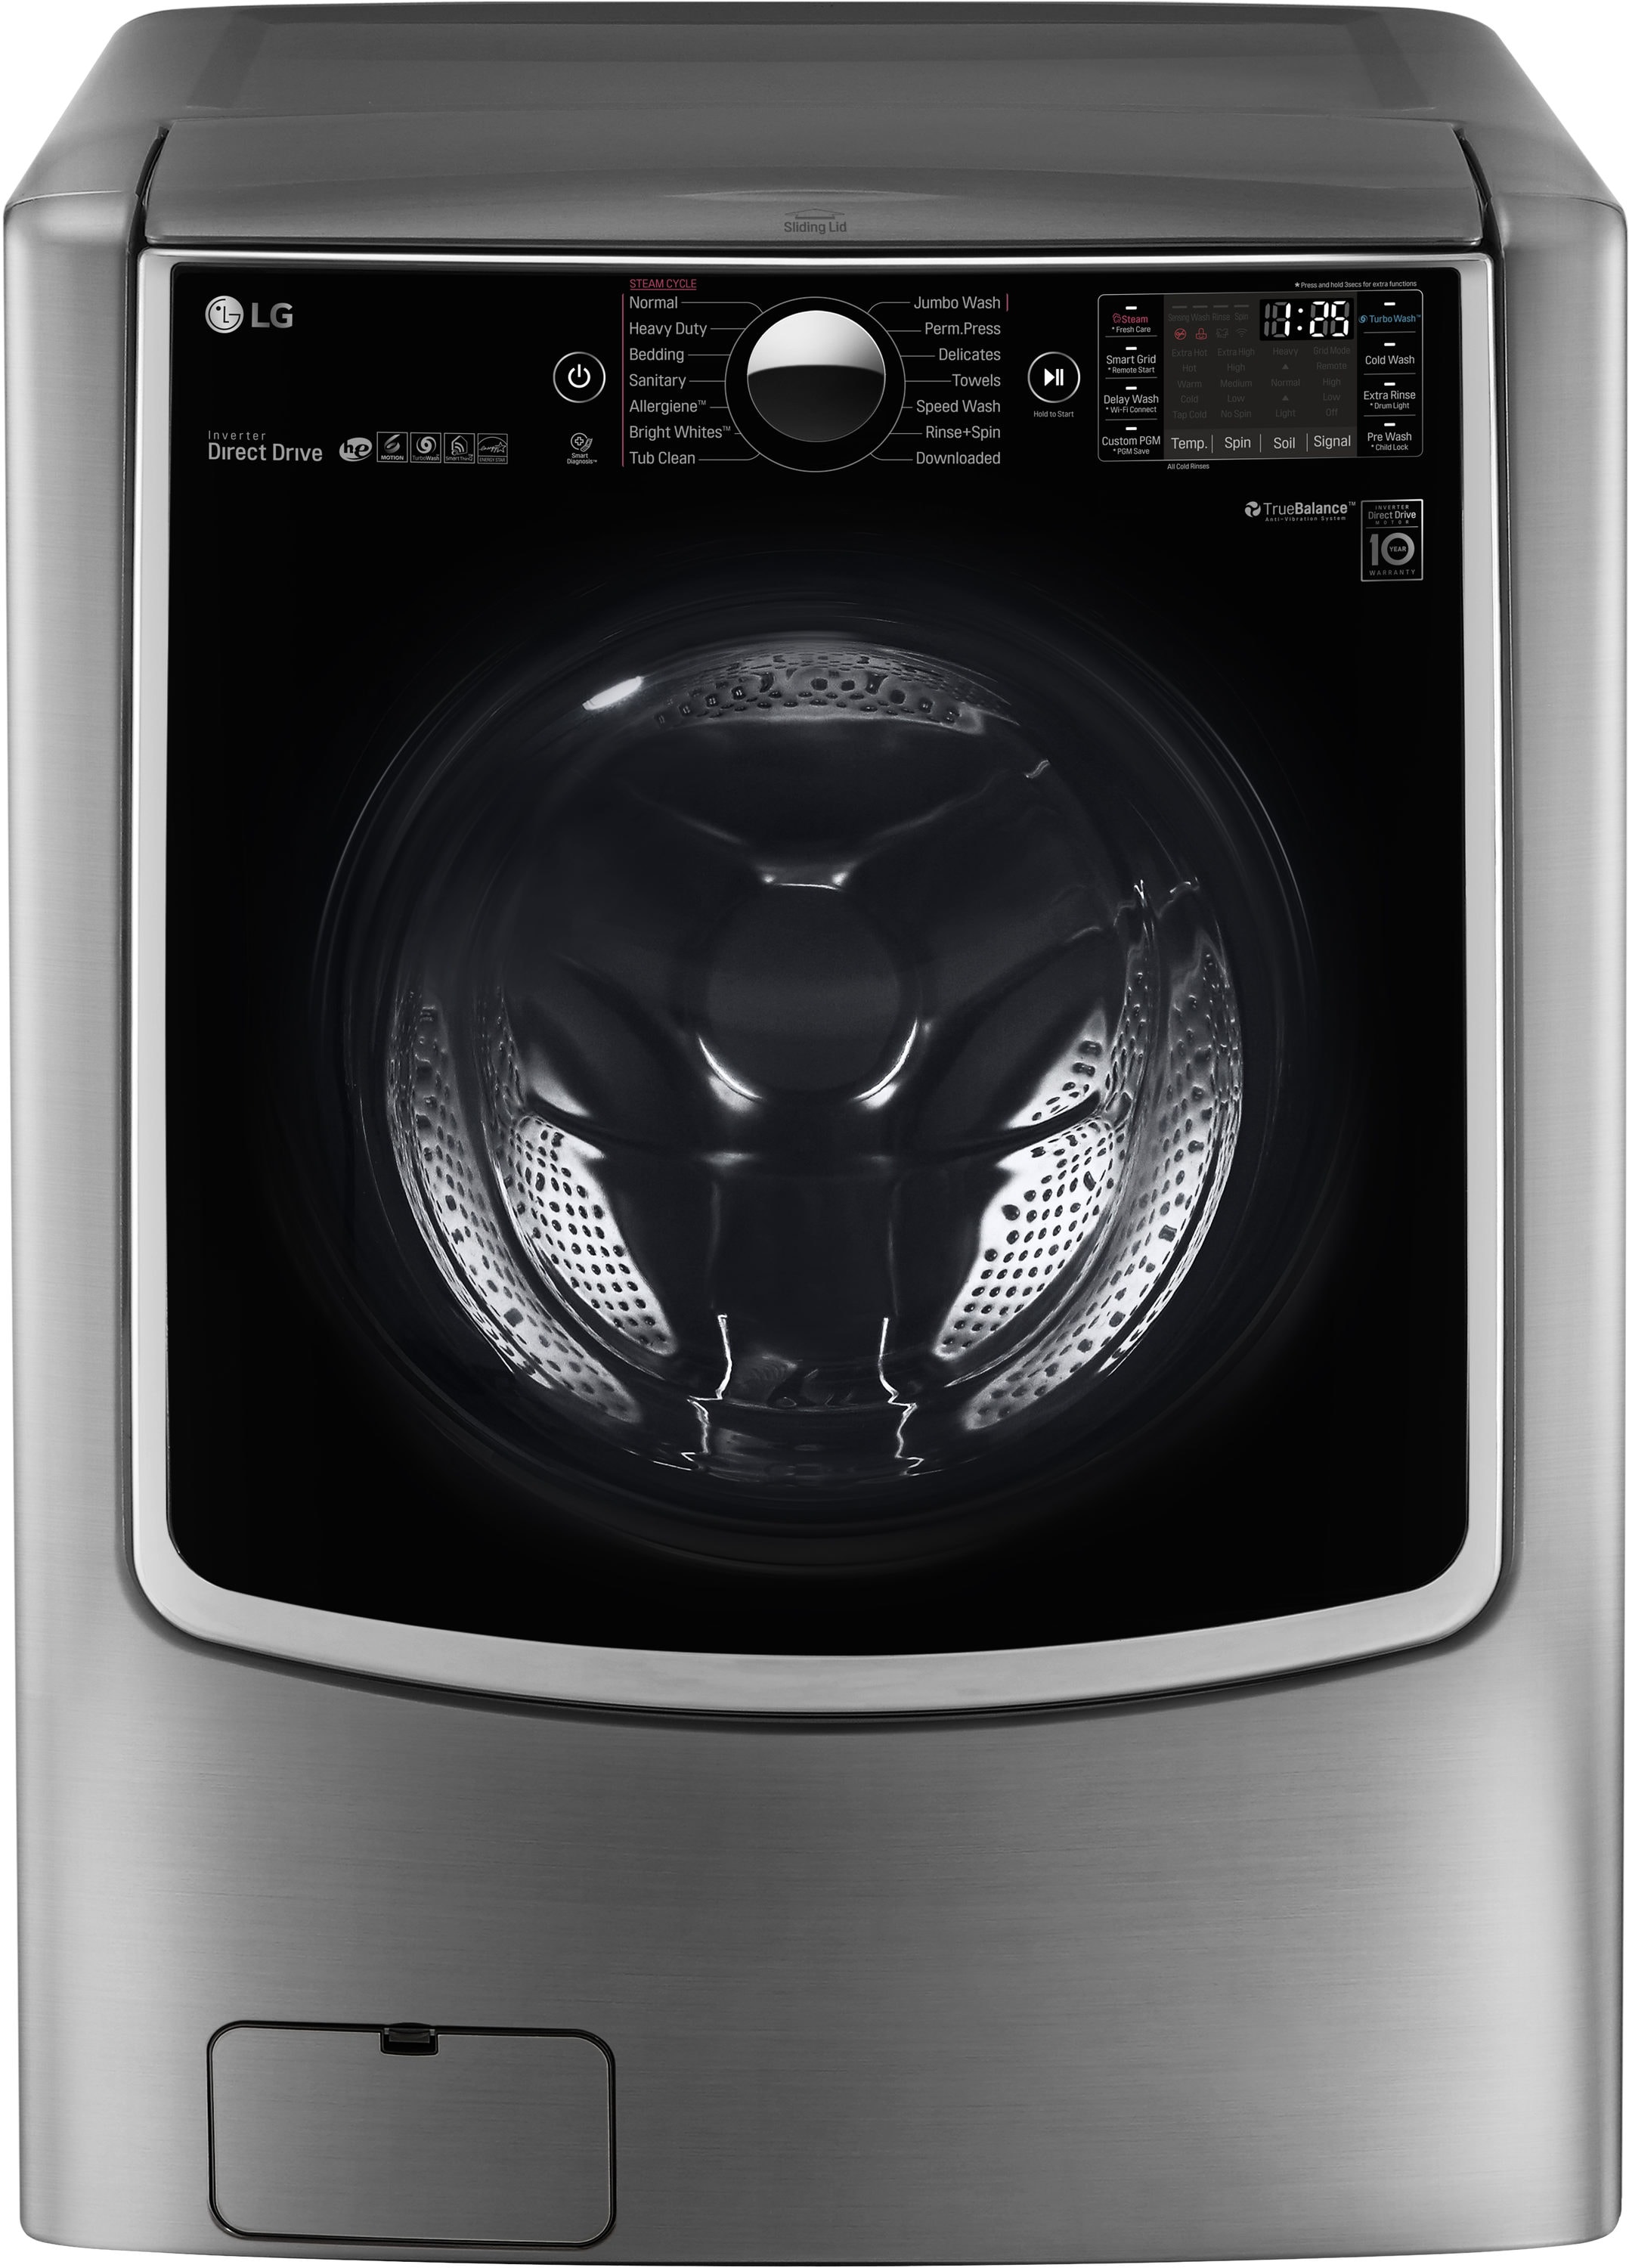 LG TWINWash Wi-Fi Enabled 5.2-cu ft High Efficiency Stackable Steam Cycle Smart Front-Load Washer (Graphite Steel) ENERGY STAR at Lowes.com